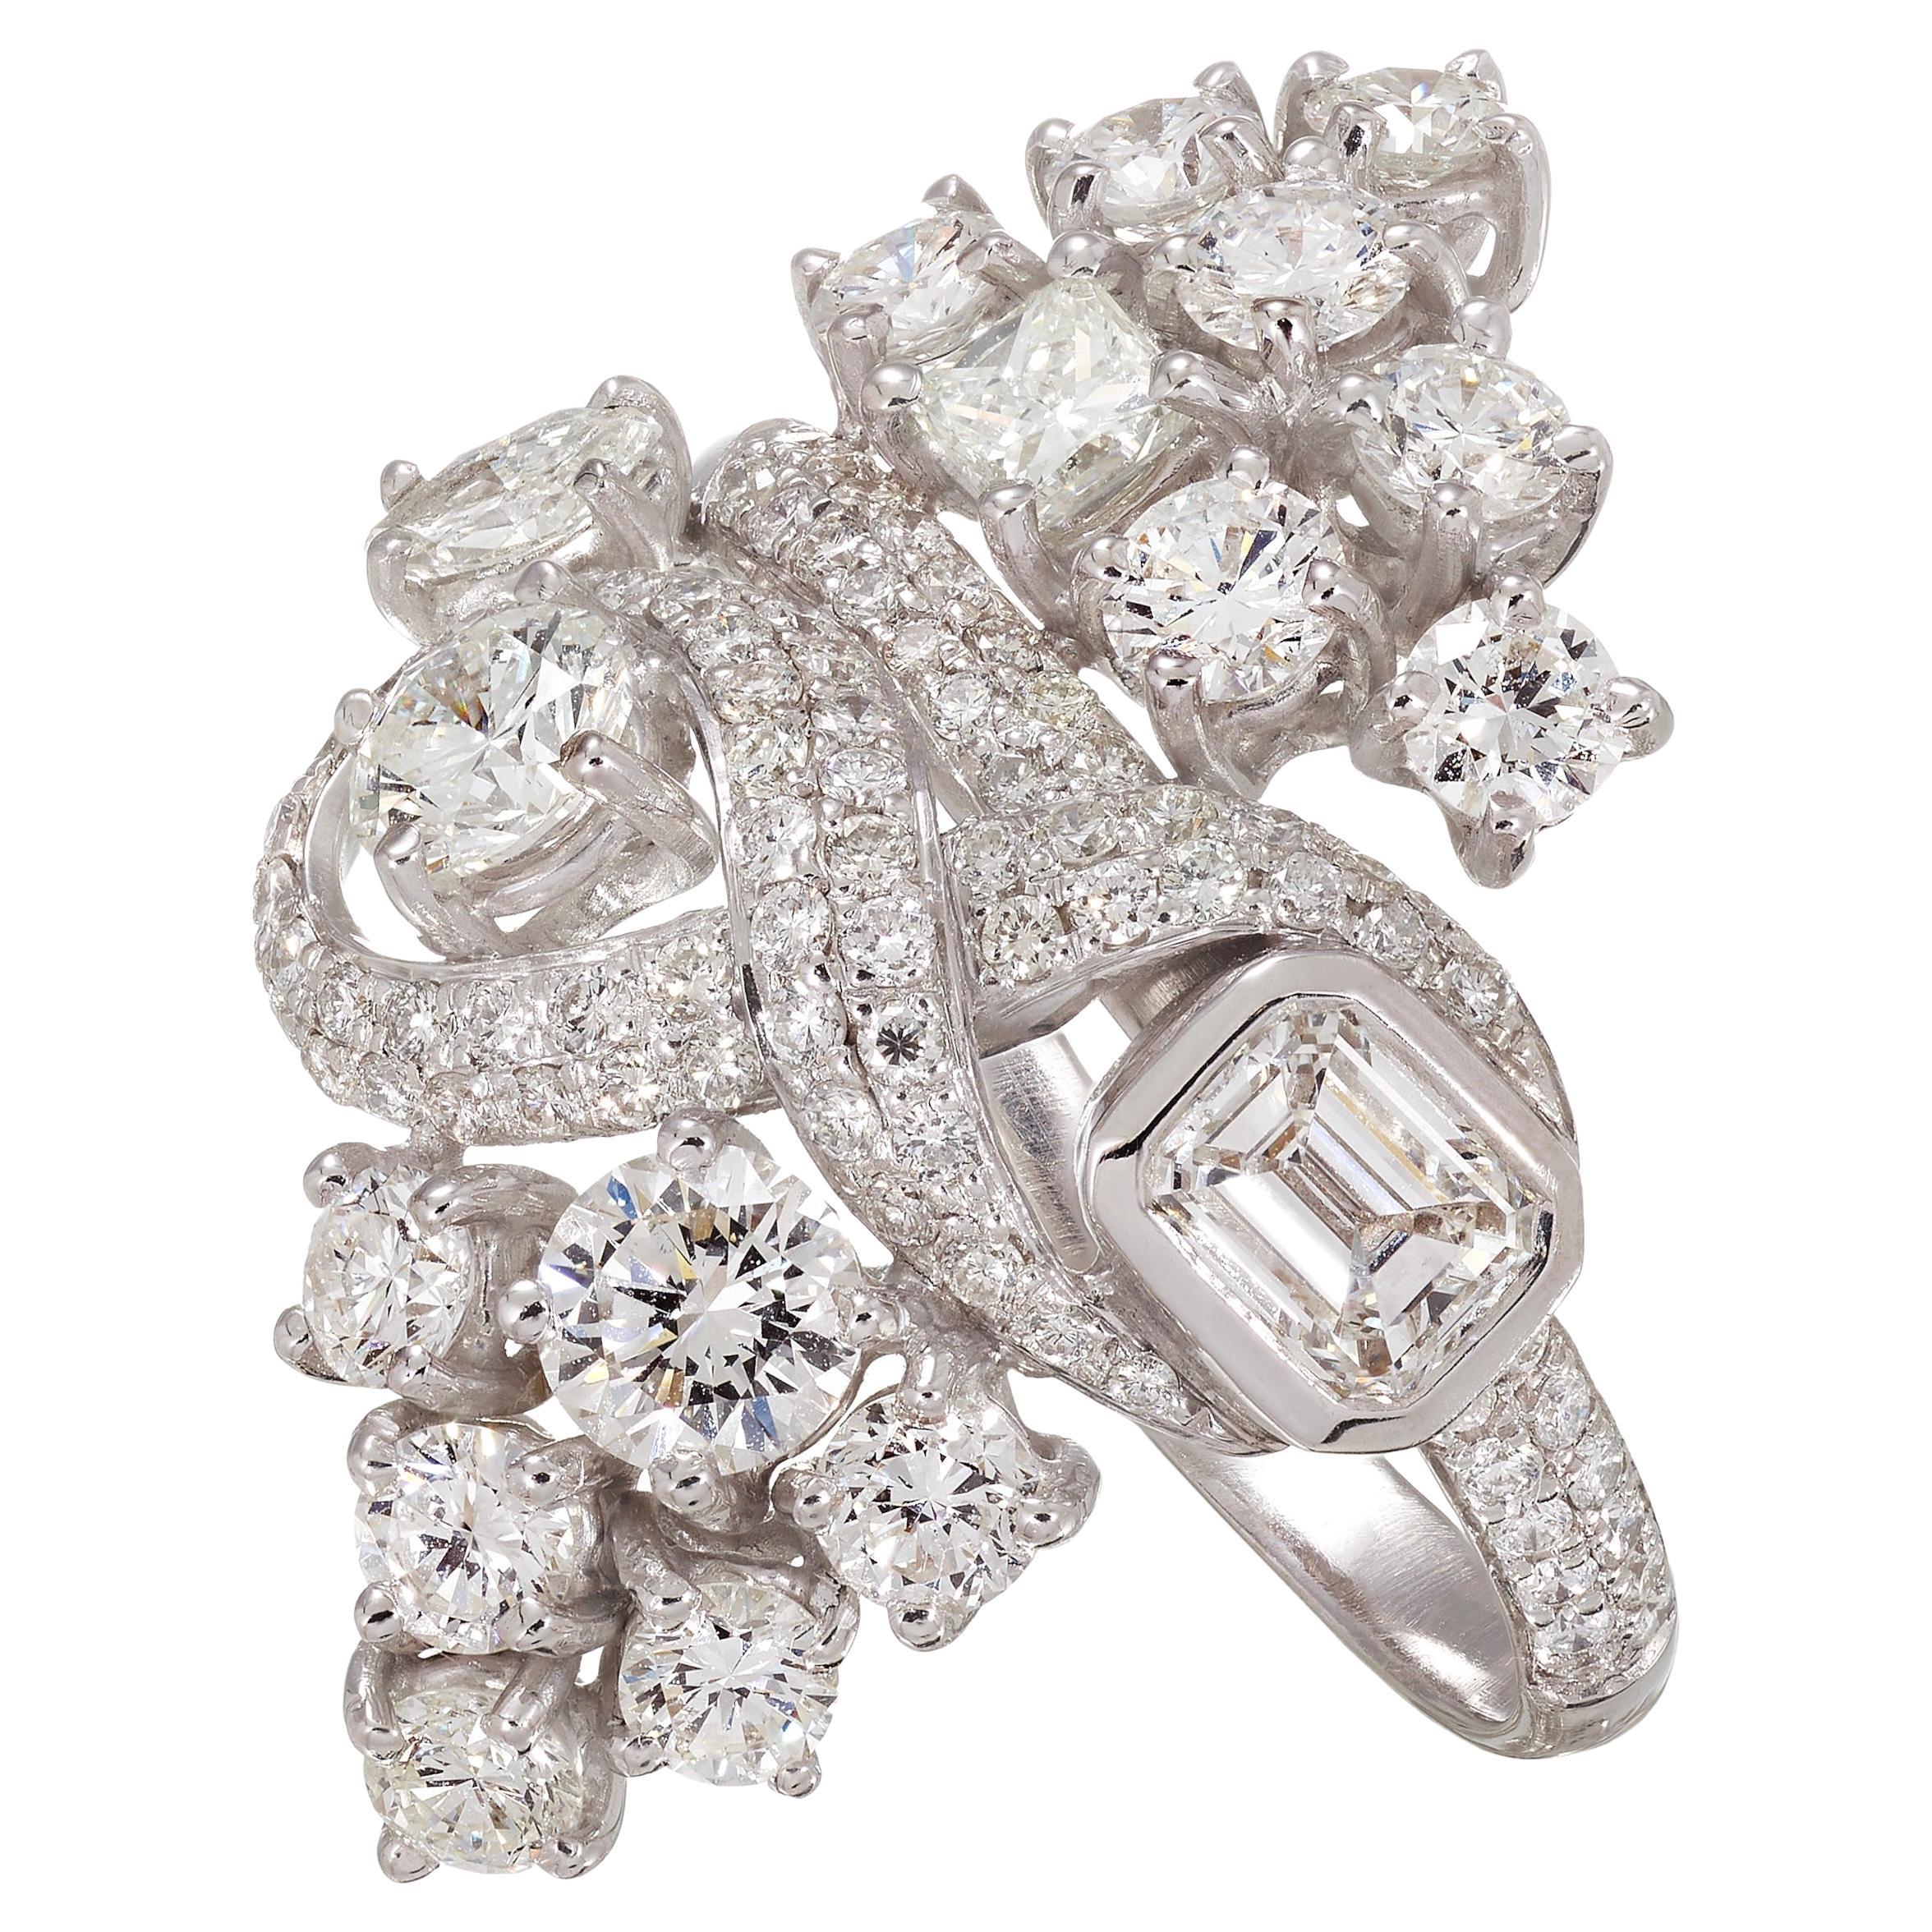 Rosior one-off Diamond Cocktail Ring set in Platinum and White Gold